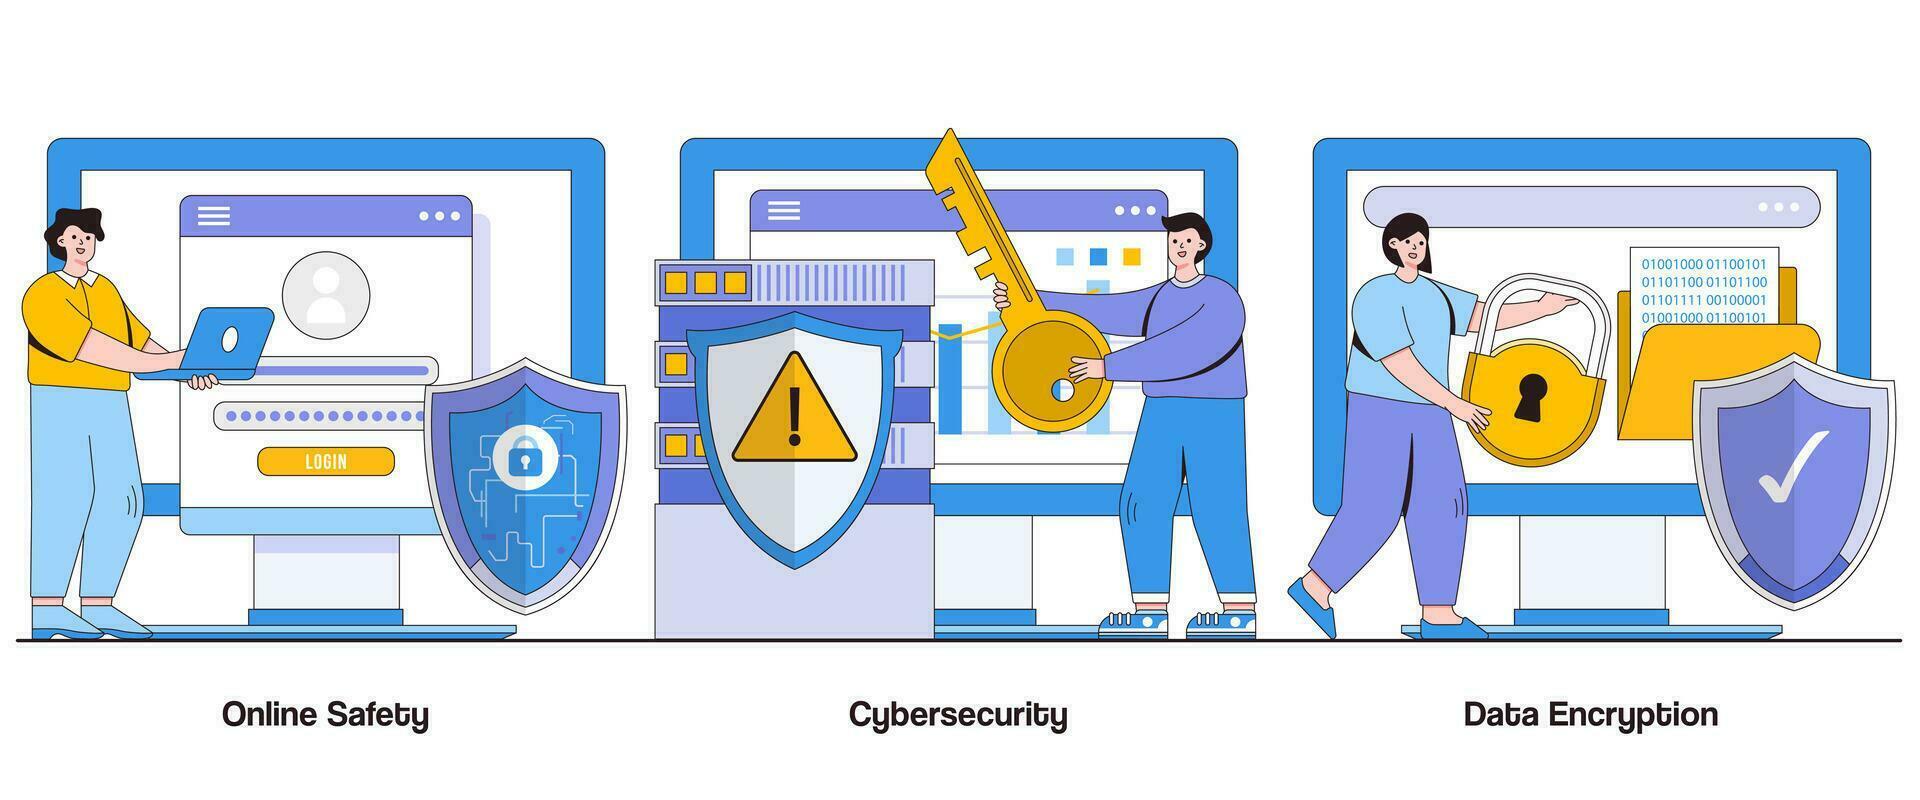 Online Safety, Cybersecurity, and Data Encryption Concept with Character. Digital Security Abstract Vector Illustration Set. Privacy, Protection, and Threat Prevention Metaphor